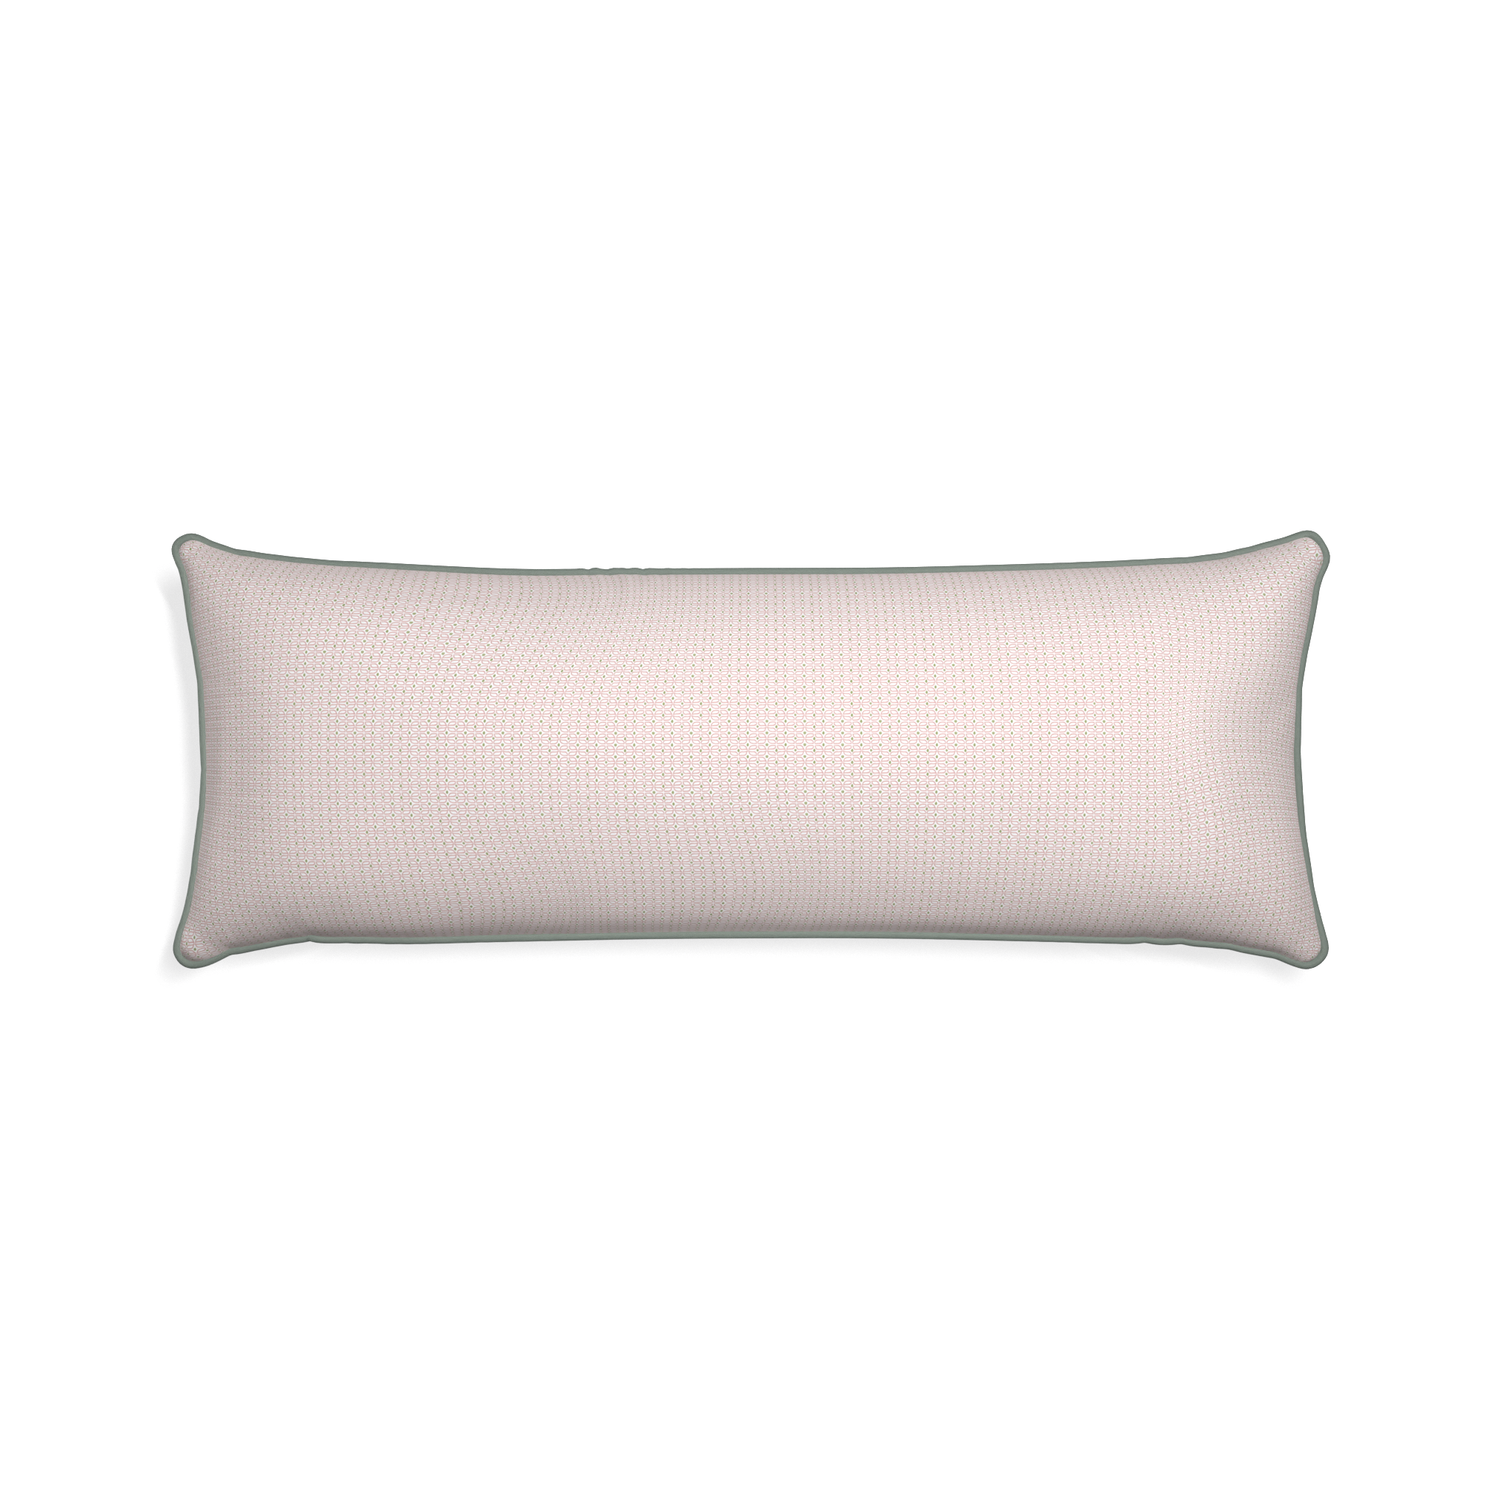 Xl-lumbar loomi pink custom pink geometricpillow with sage piping on white background